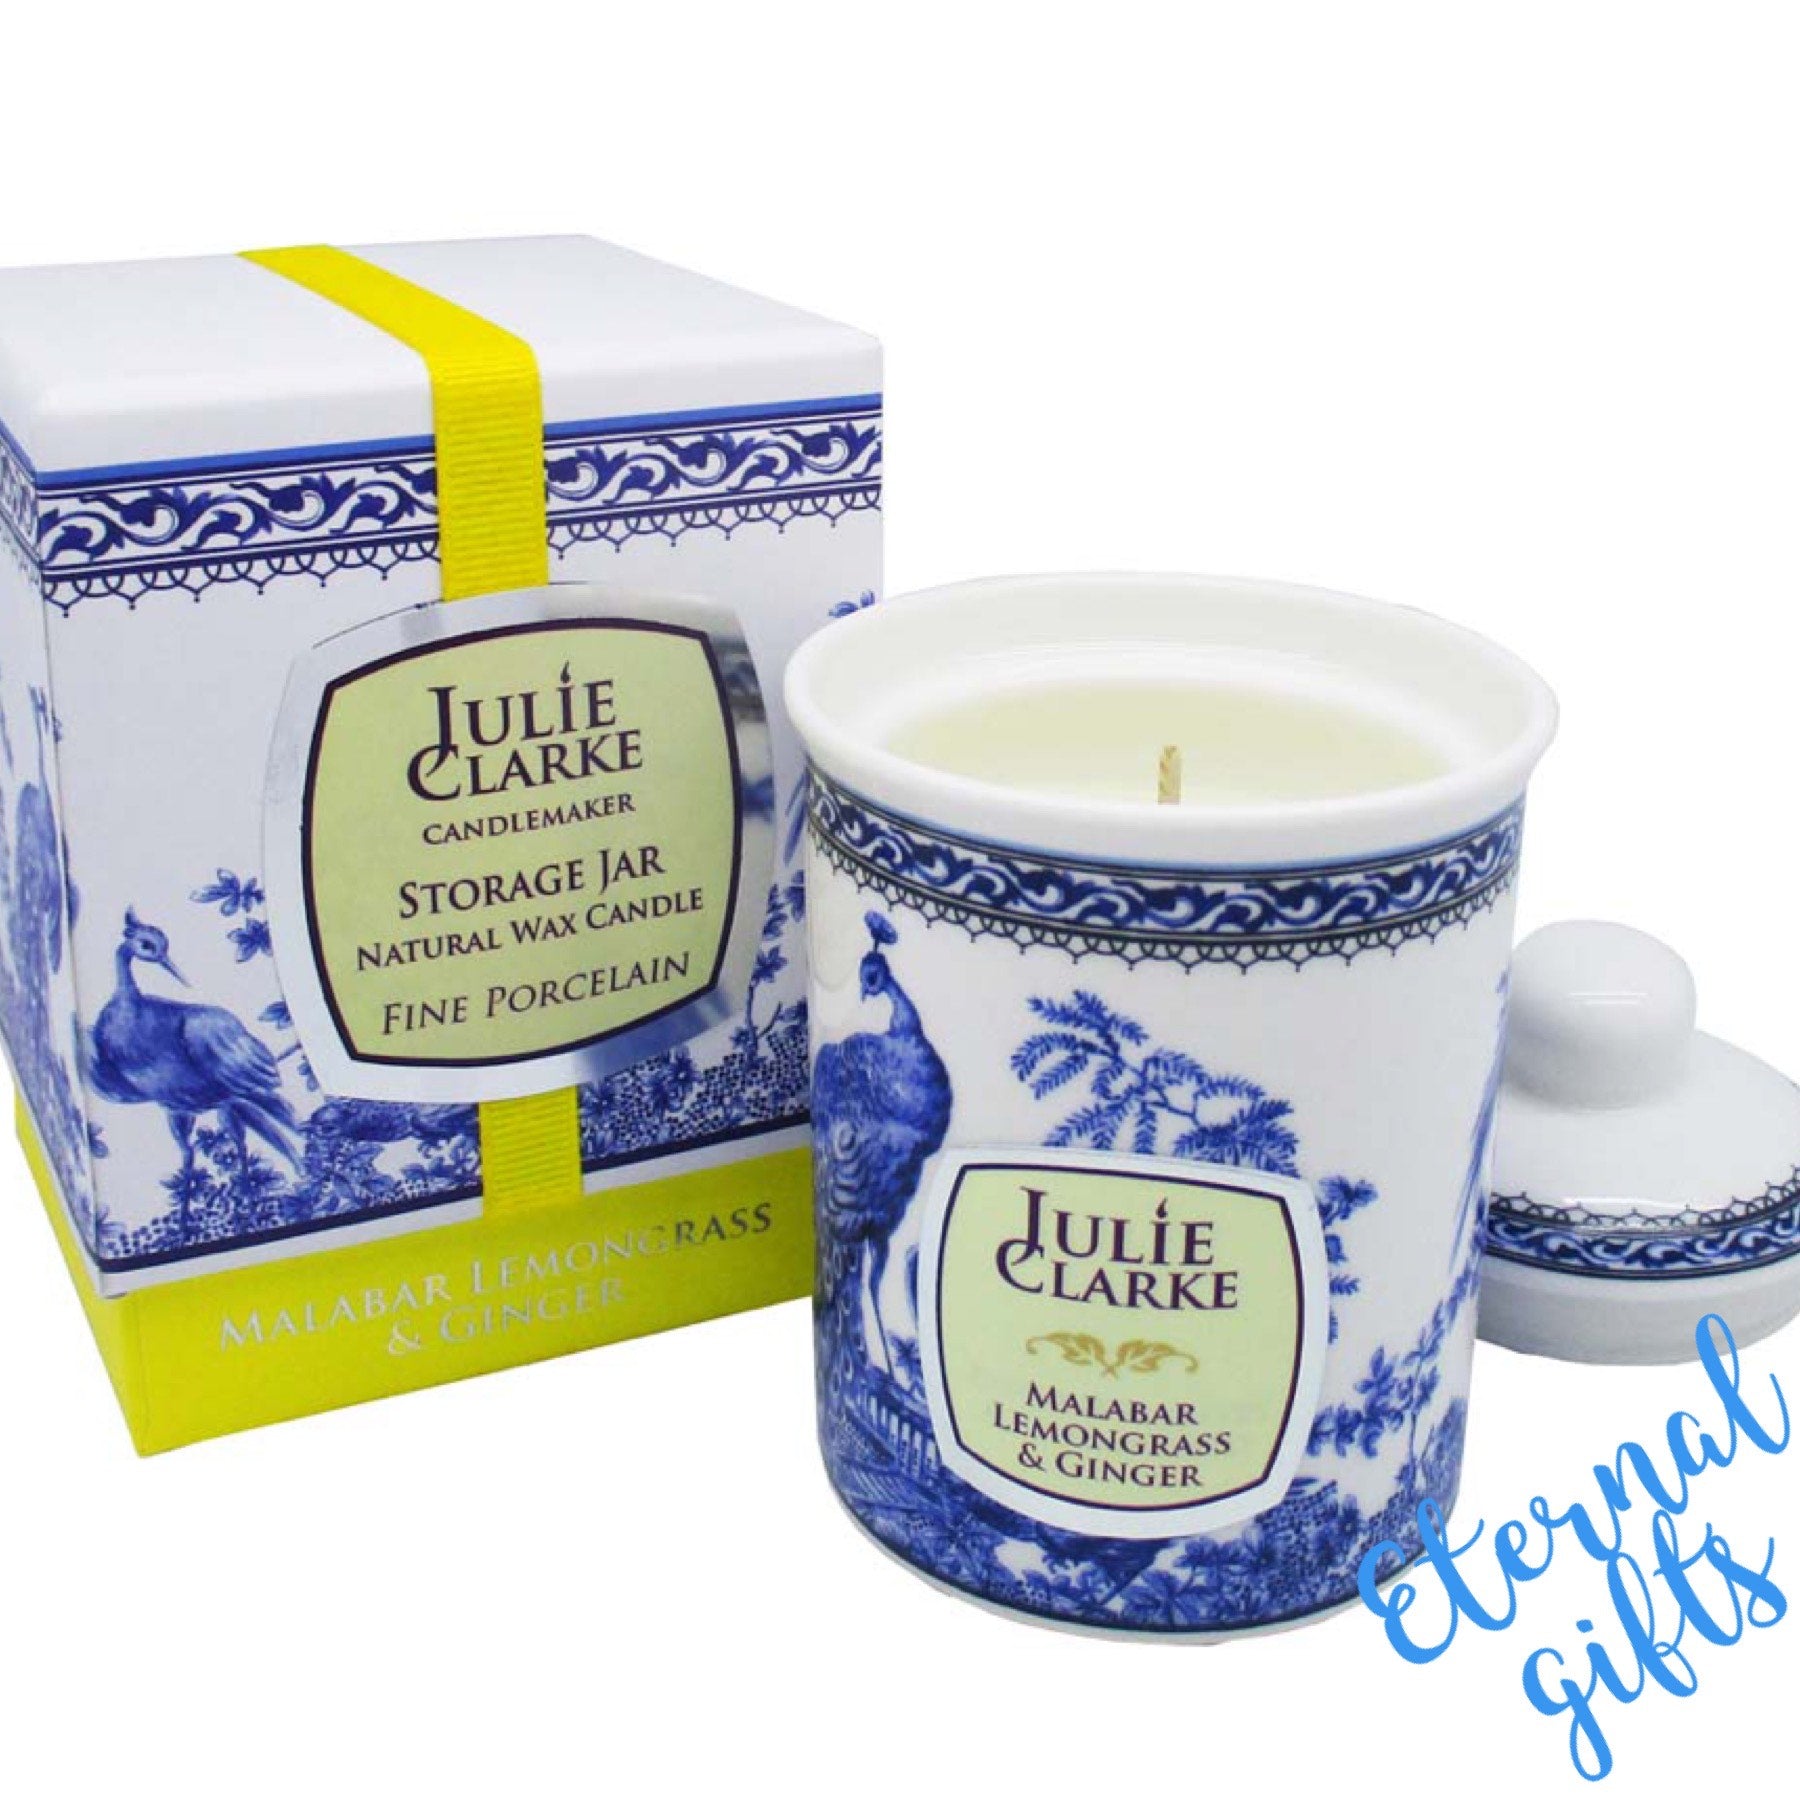 Malabar Lemongrass and Ginger Candle - Julie Clarke Peacock Collection